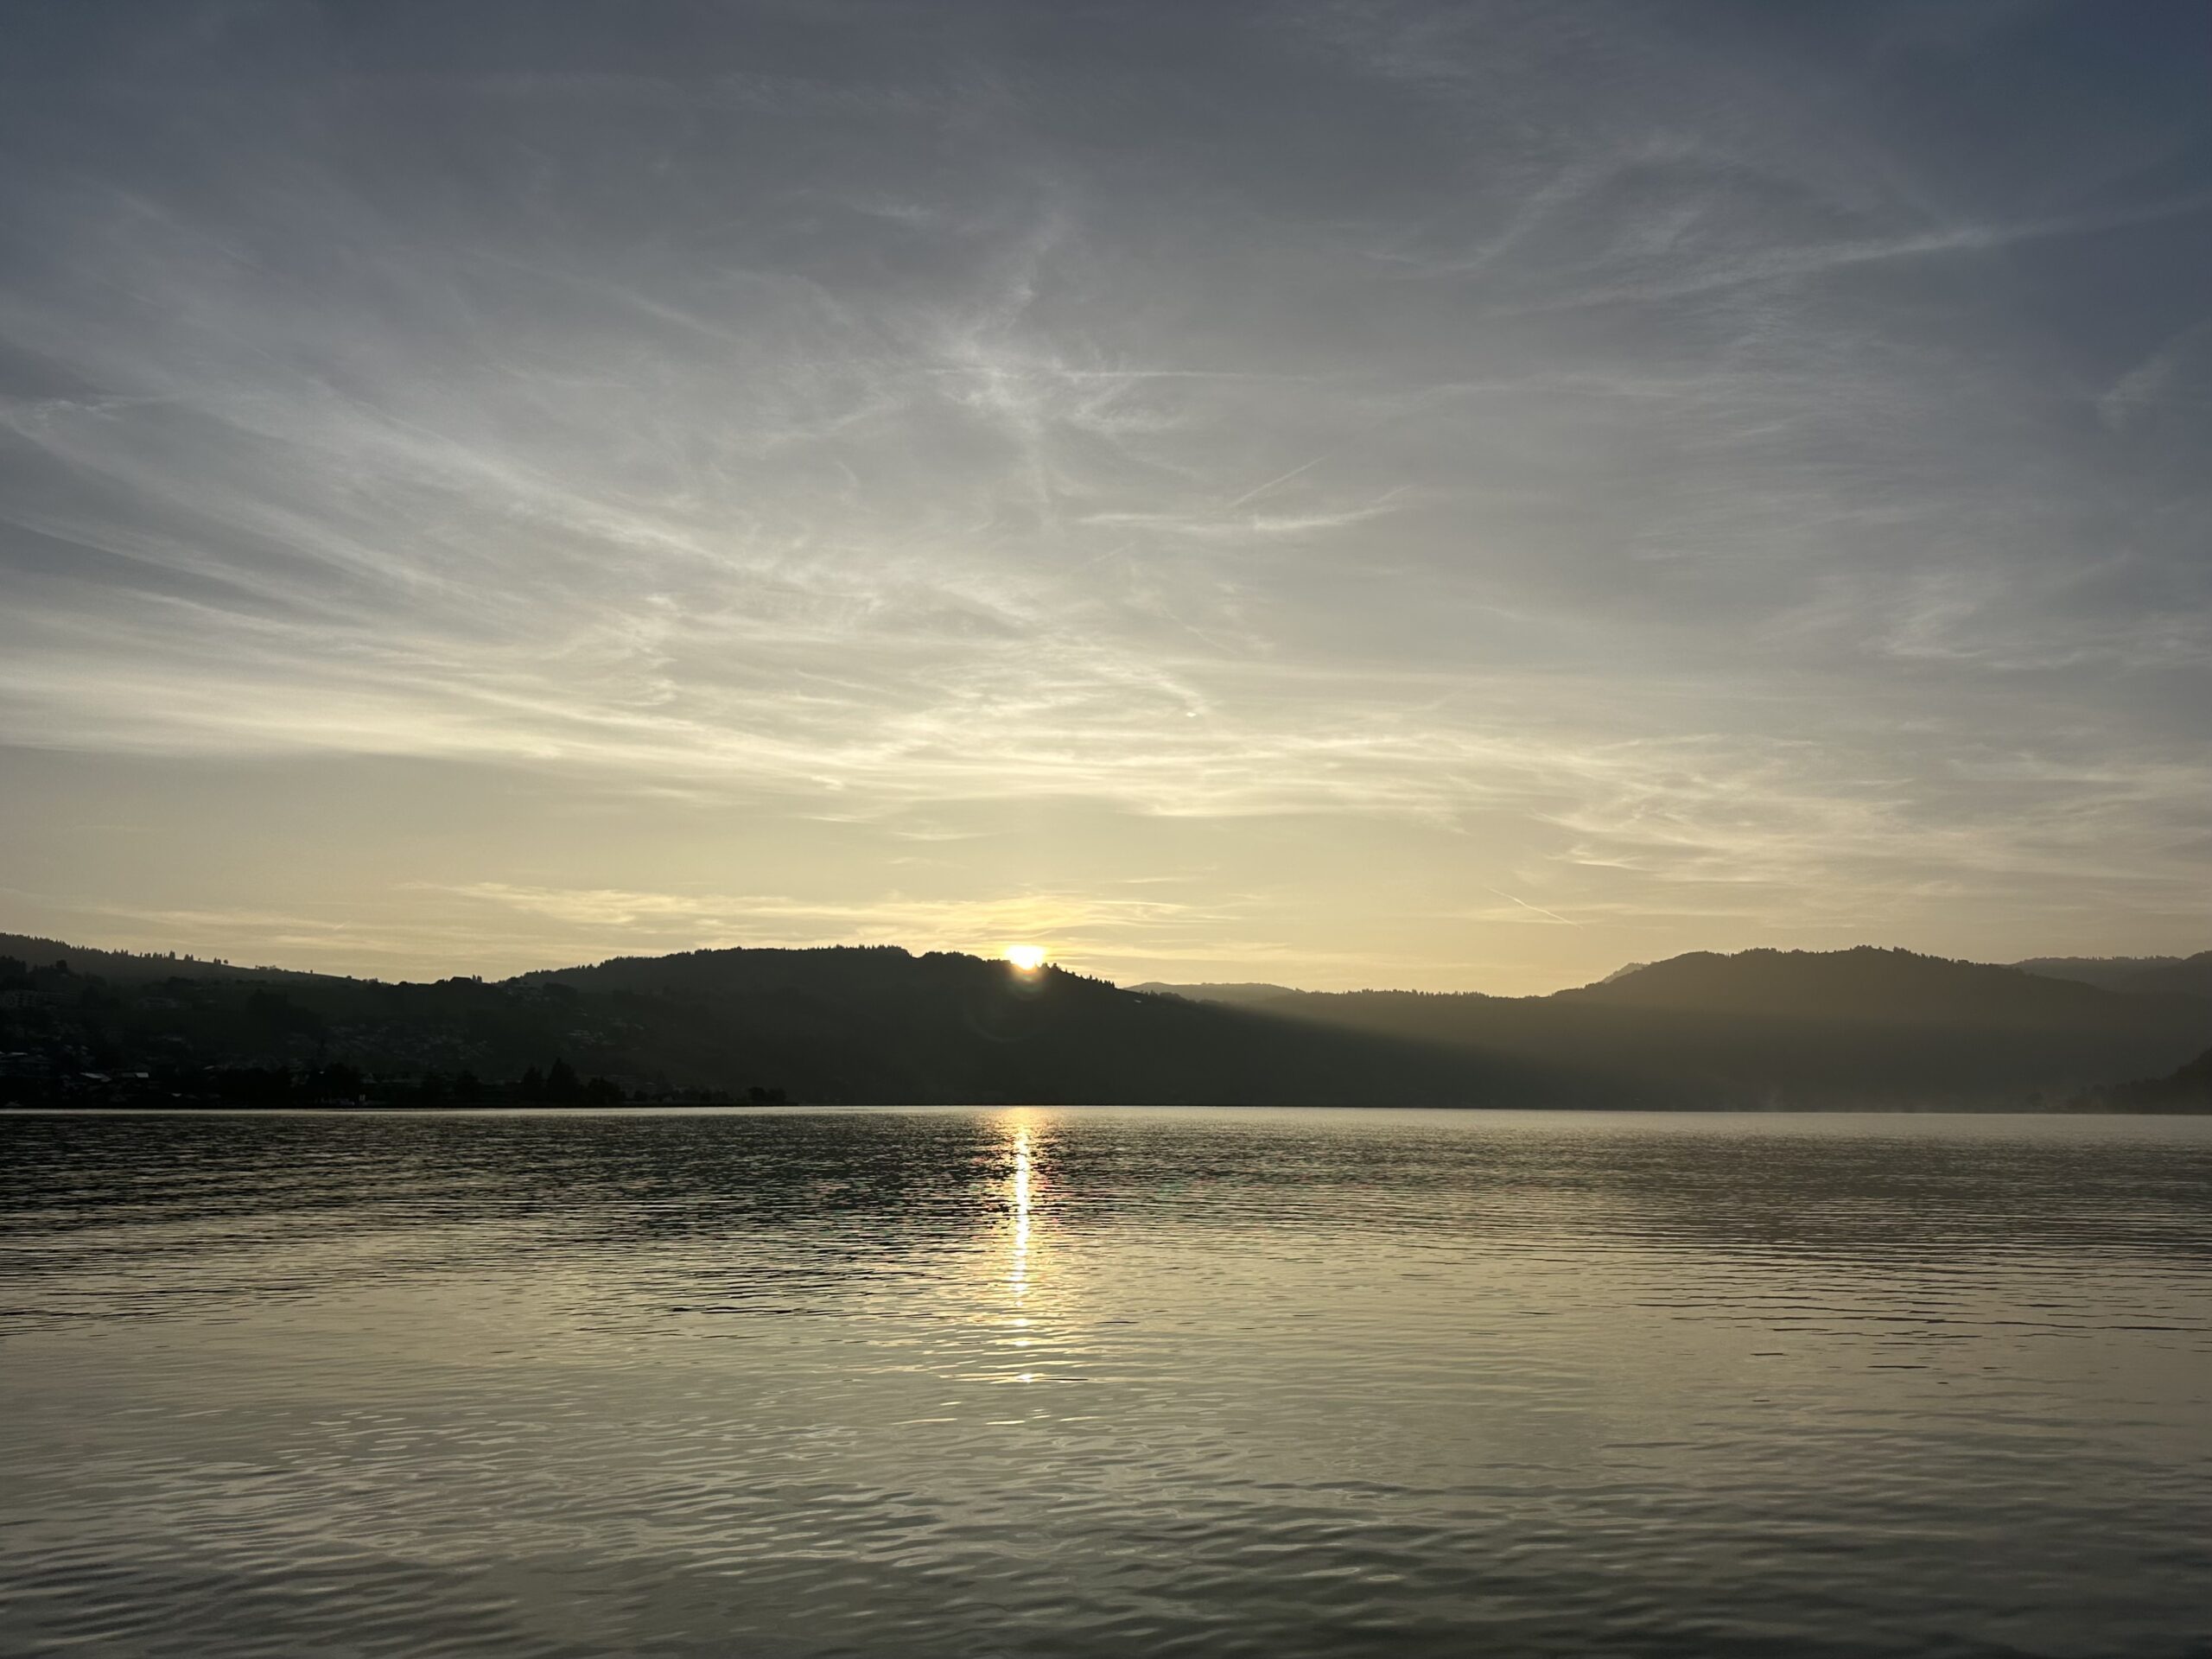 View across a lake directly into the sun rising over forested hills.